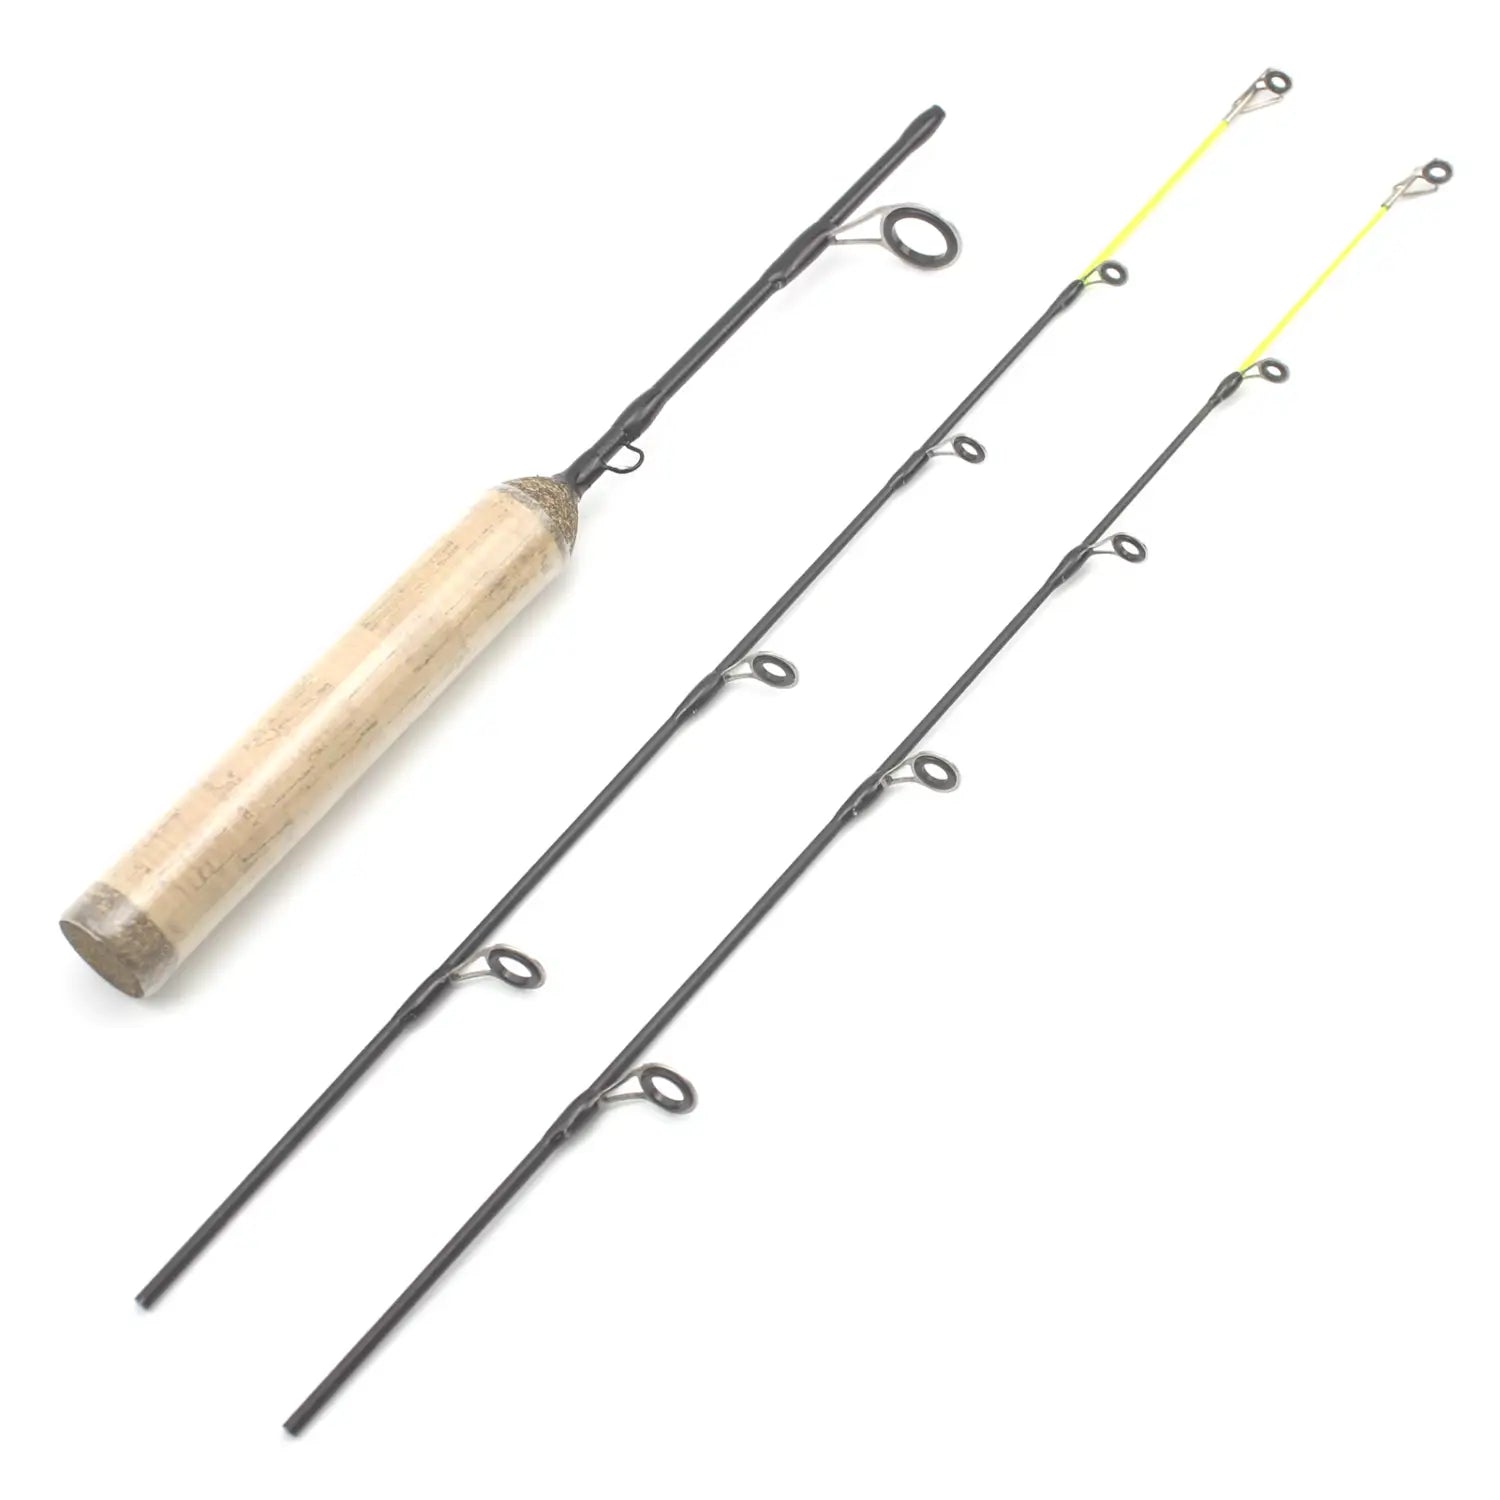 65cm 2Tips Rod Reel Combos Winter Ice Fishing set Pole Tackle Carbon pole rod with reel Pikes fish